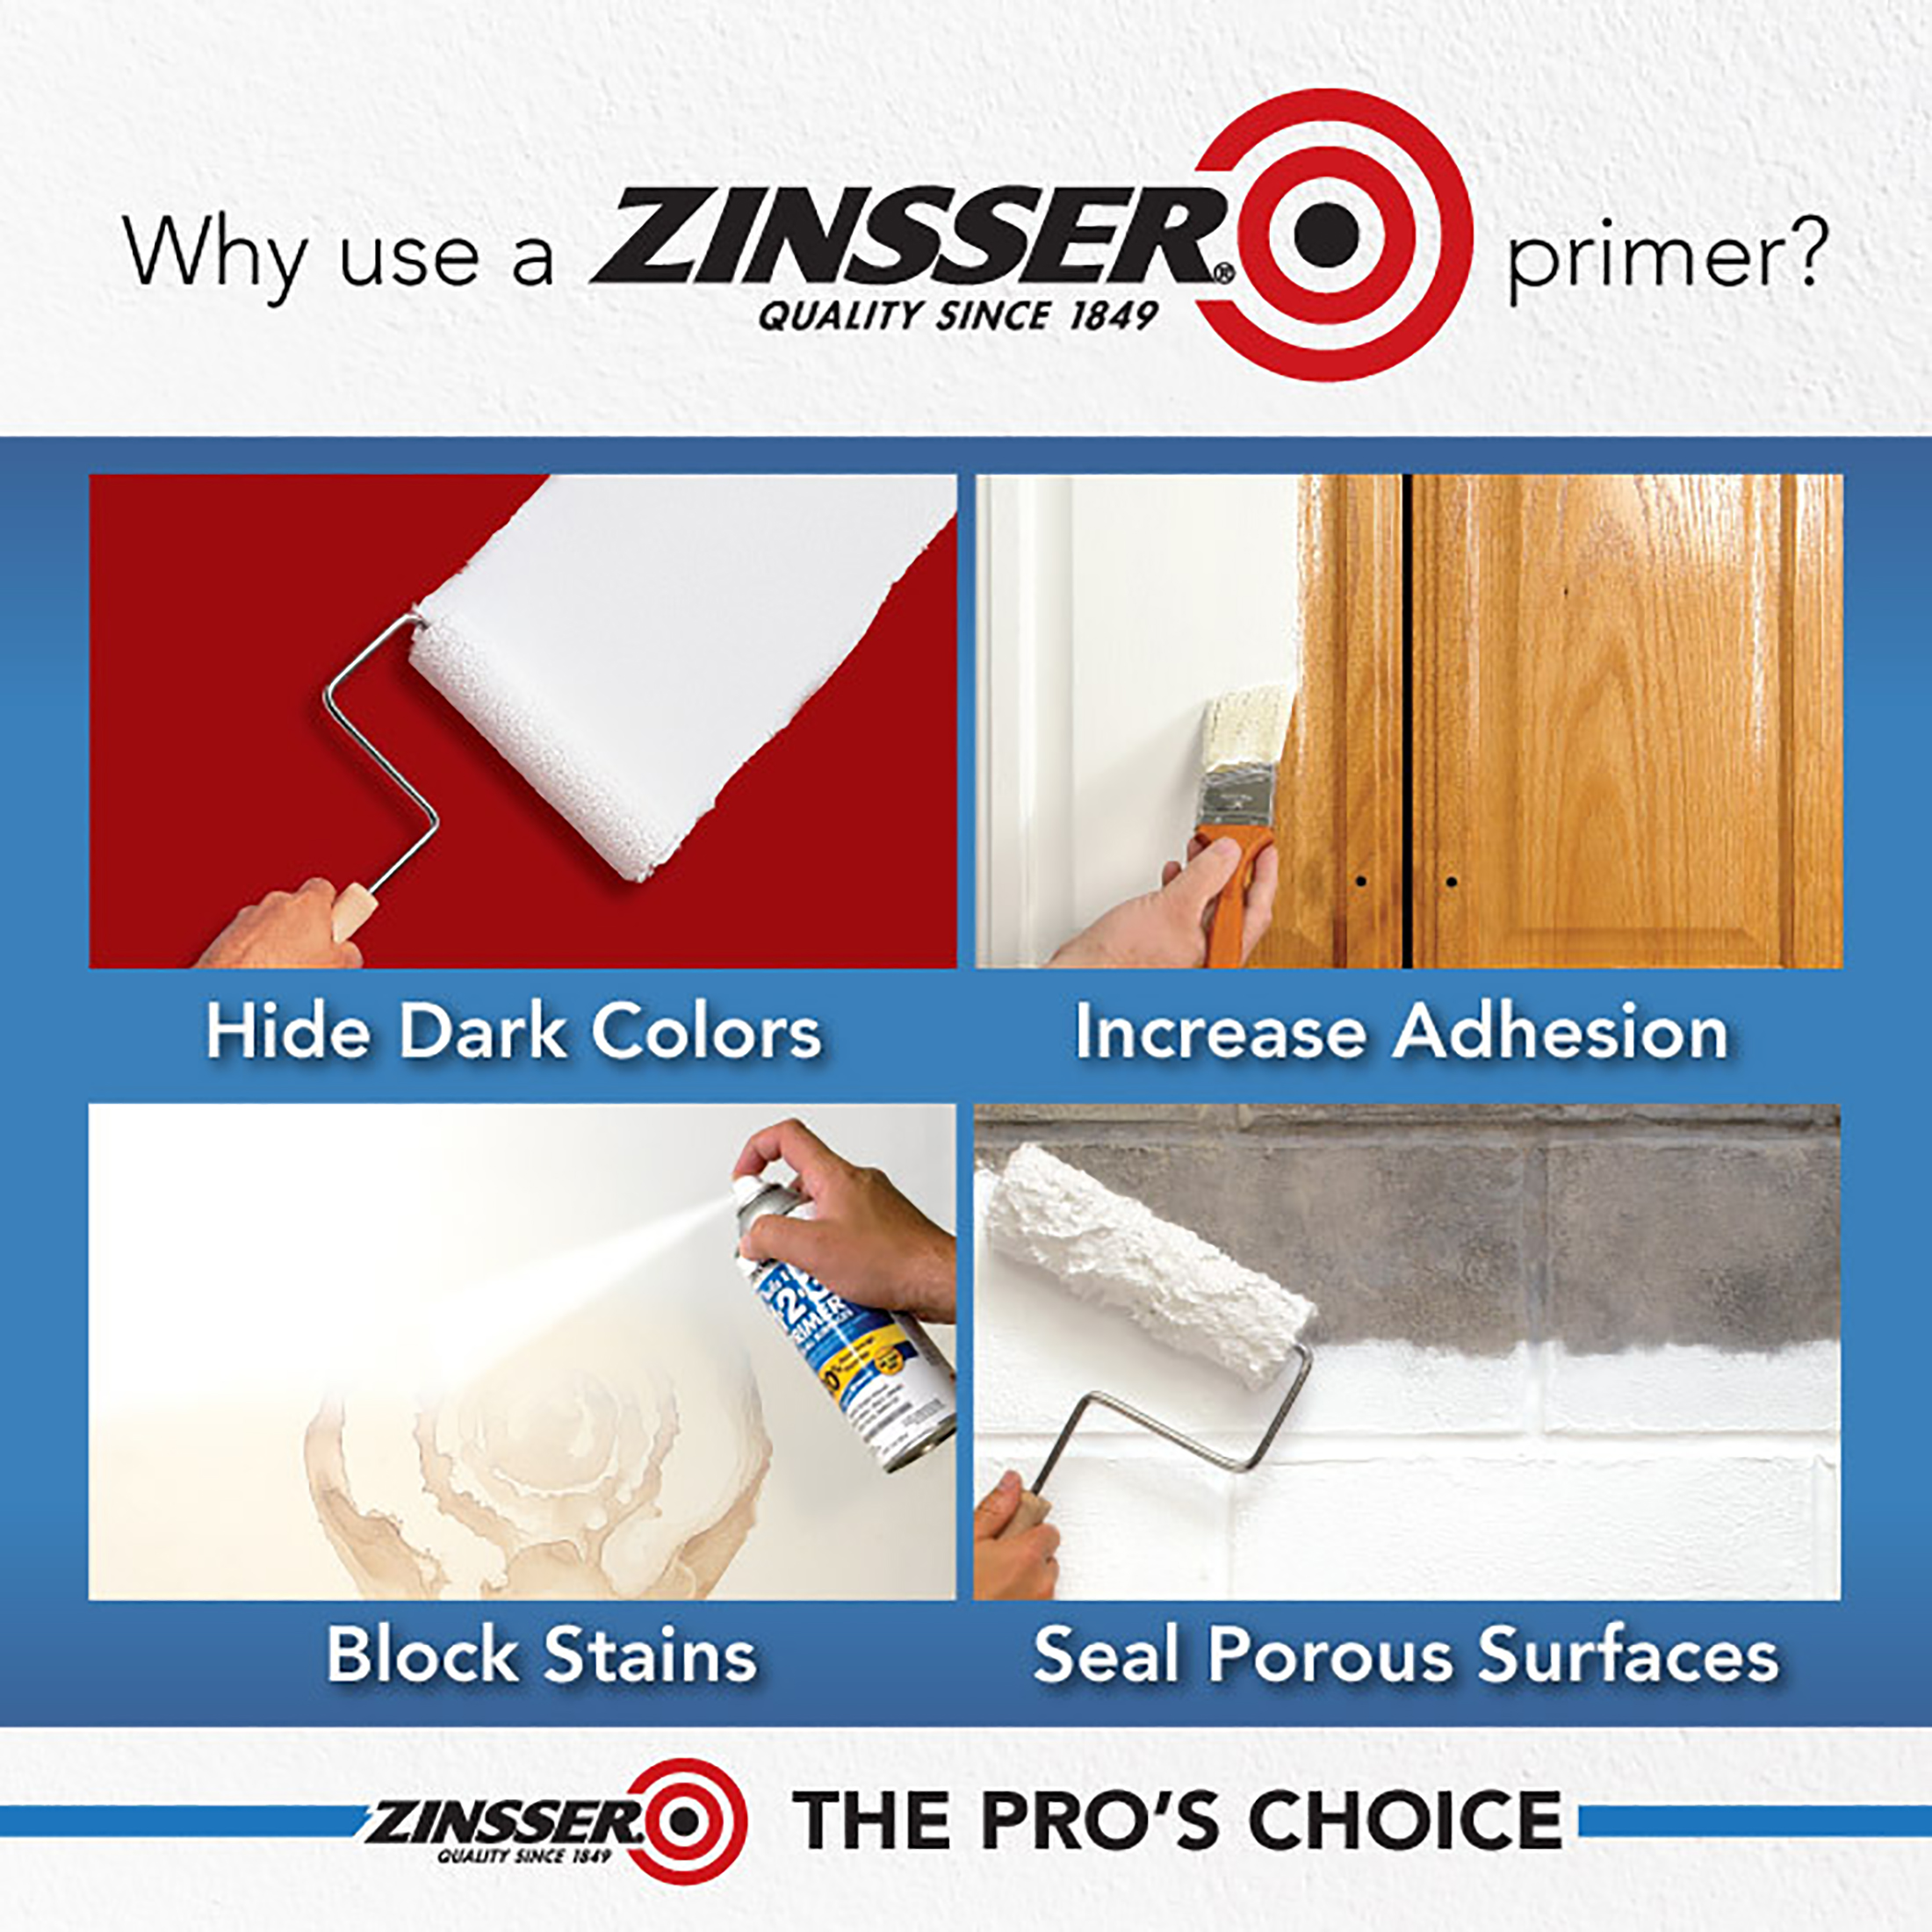 White, Zinsser Cover Stain Flat Oil-Based Interior and Exterior Primer and Sealer-3501, Gallon - image 5 of 11